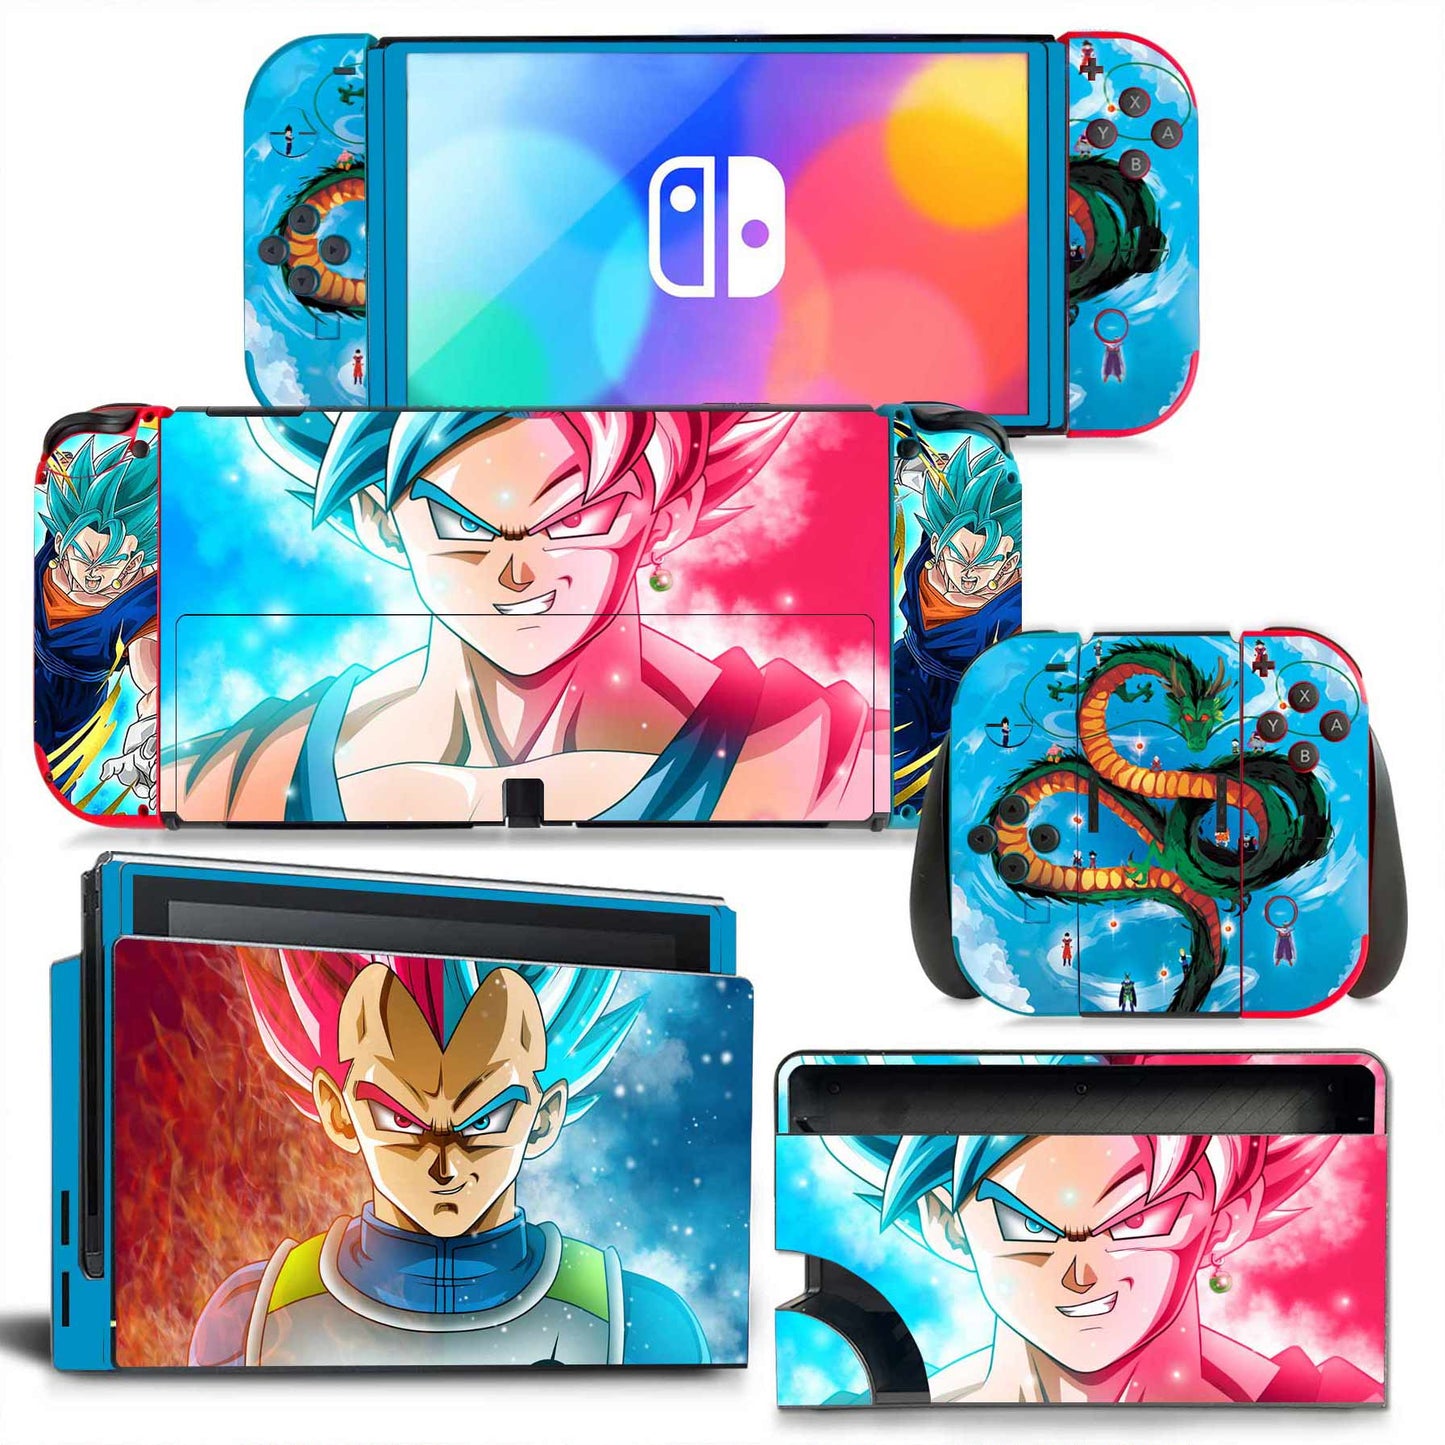 Anime Nintendo Switch Sticker Protective Cover 15